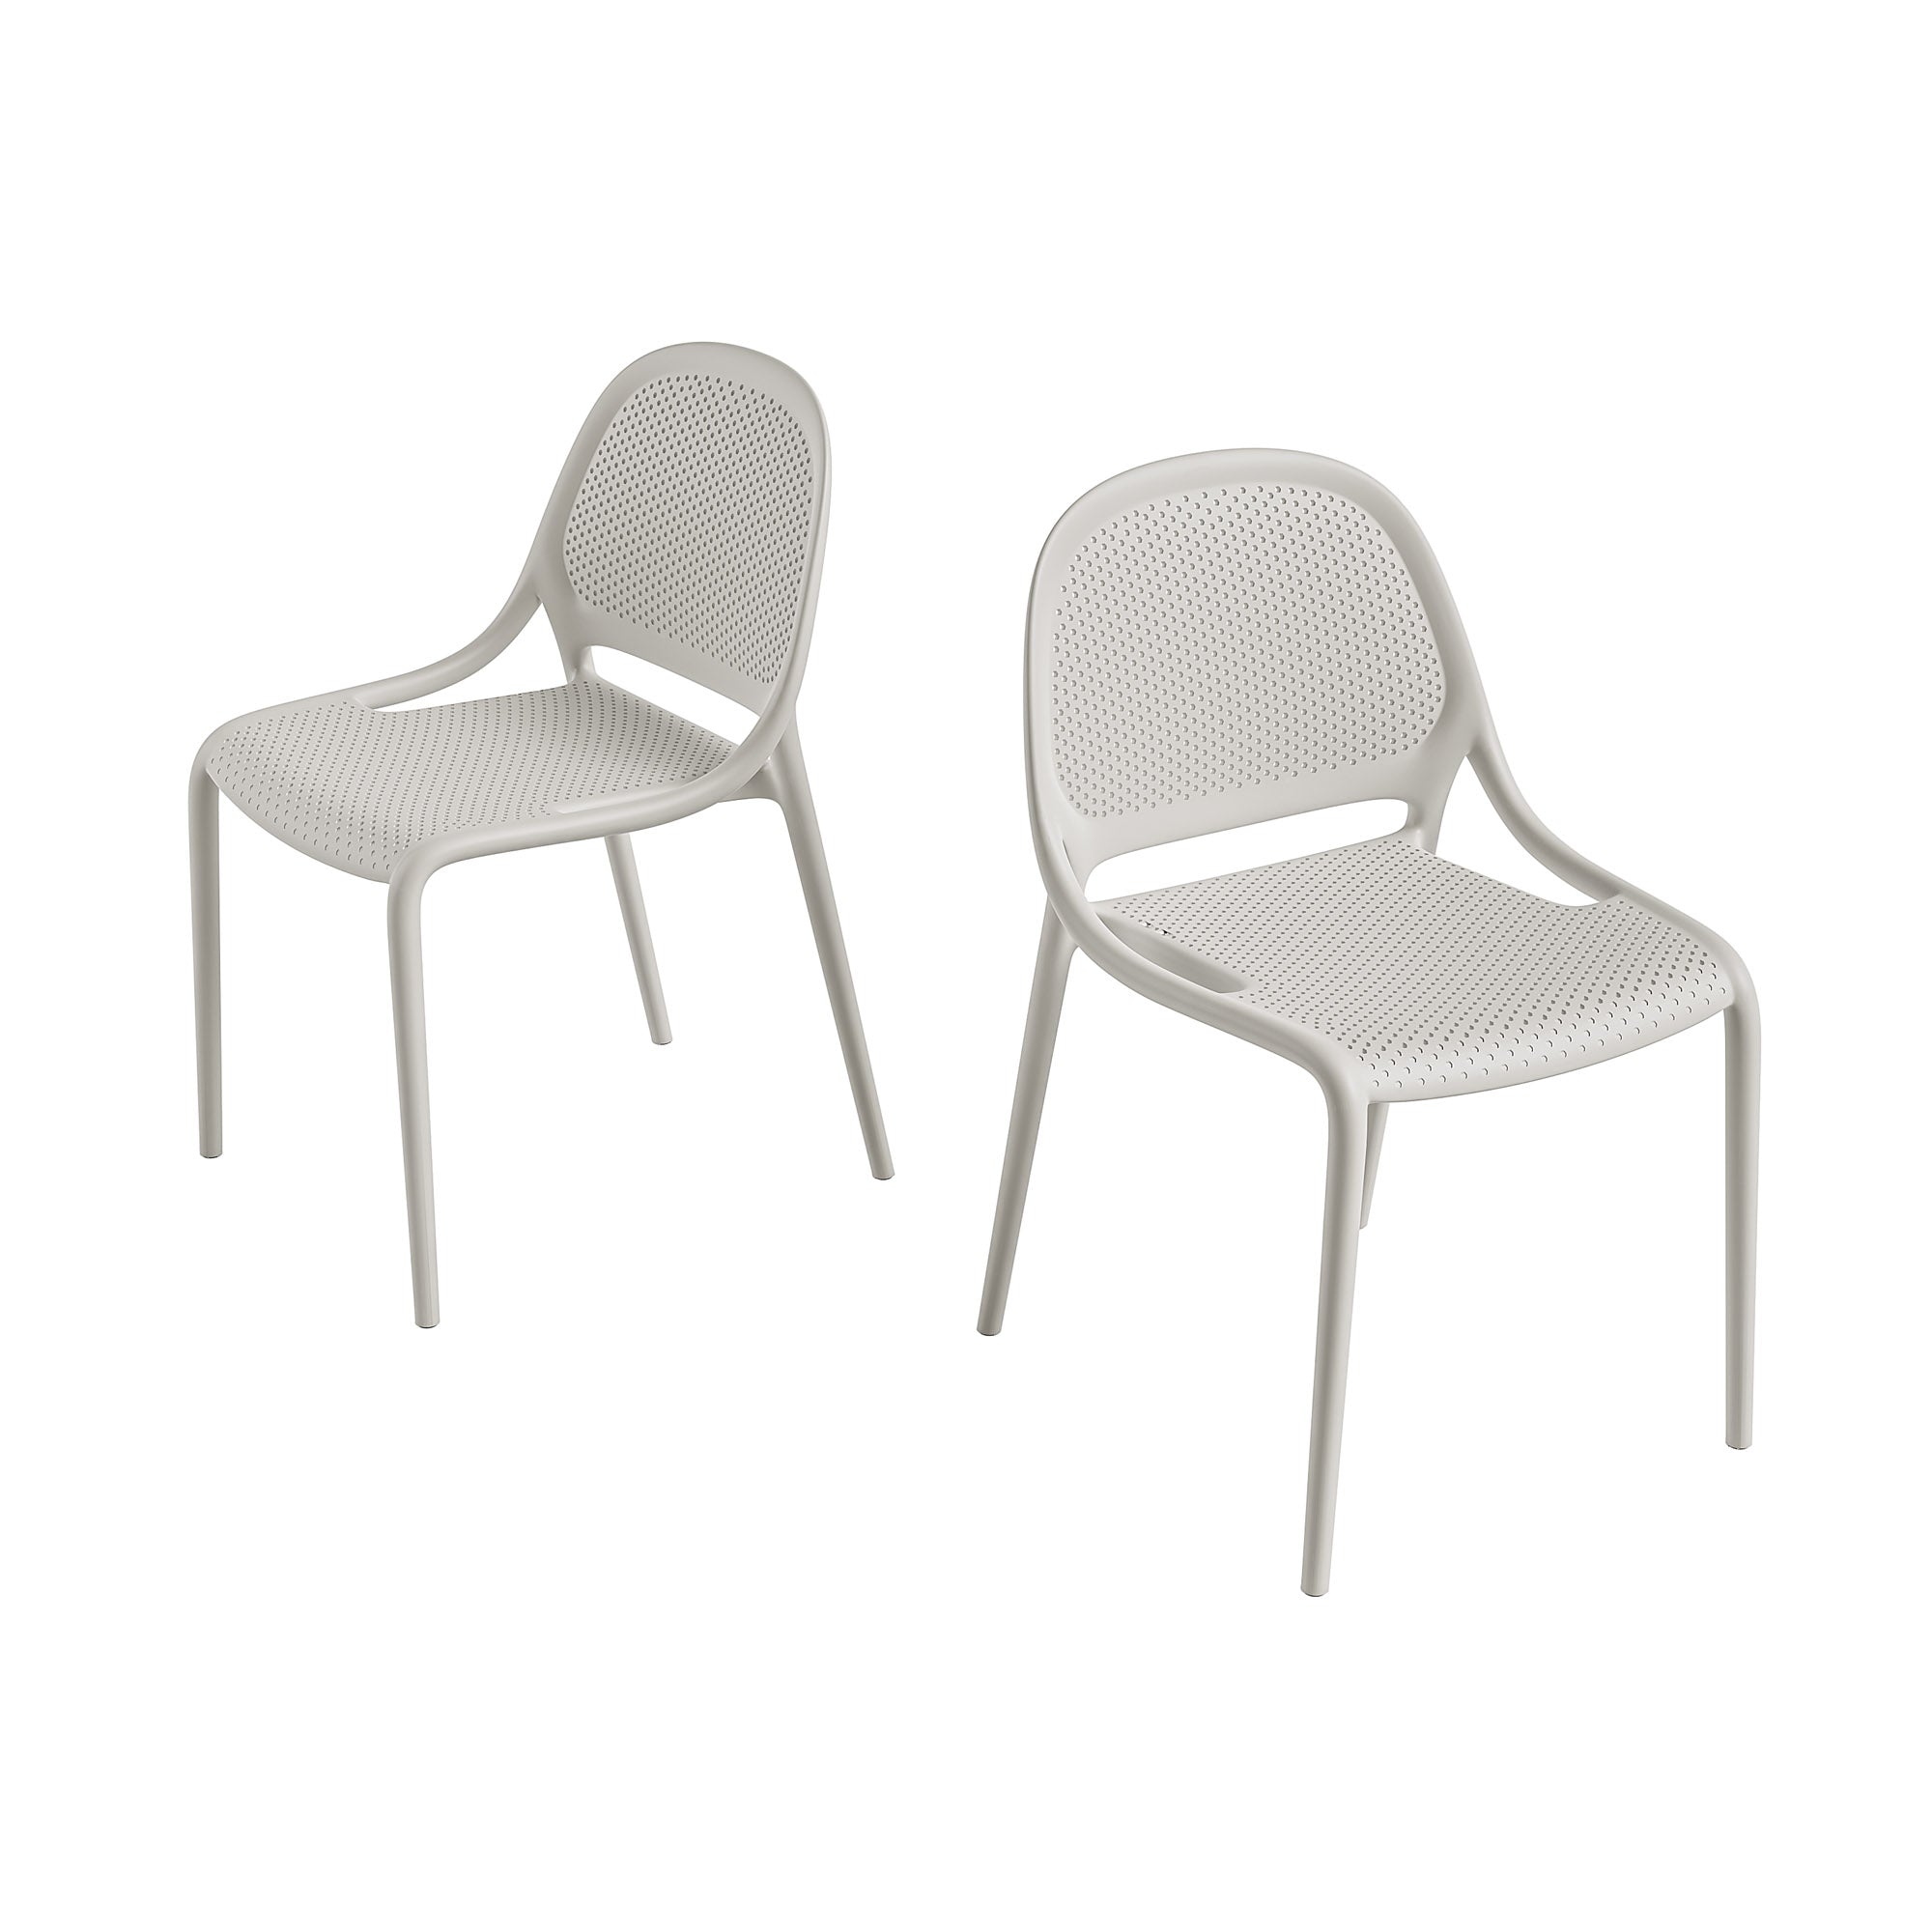 Shay Indoor and Outdoor Stackable Chair - Cement Gray - Set of 2